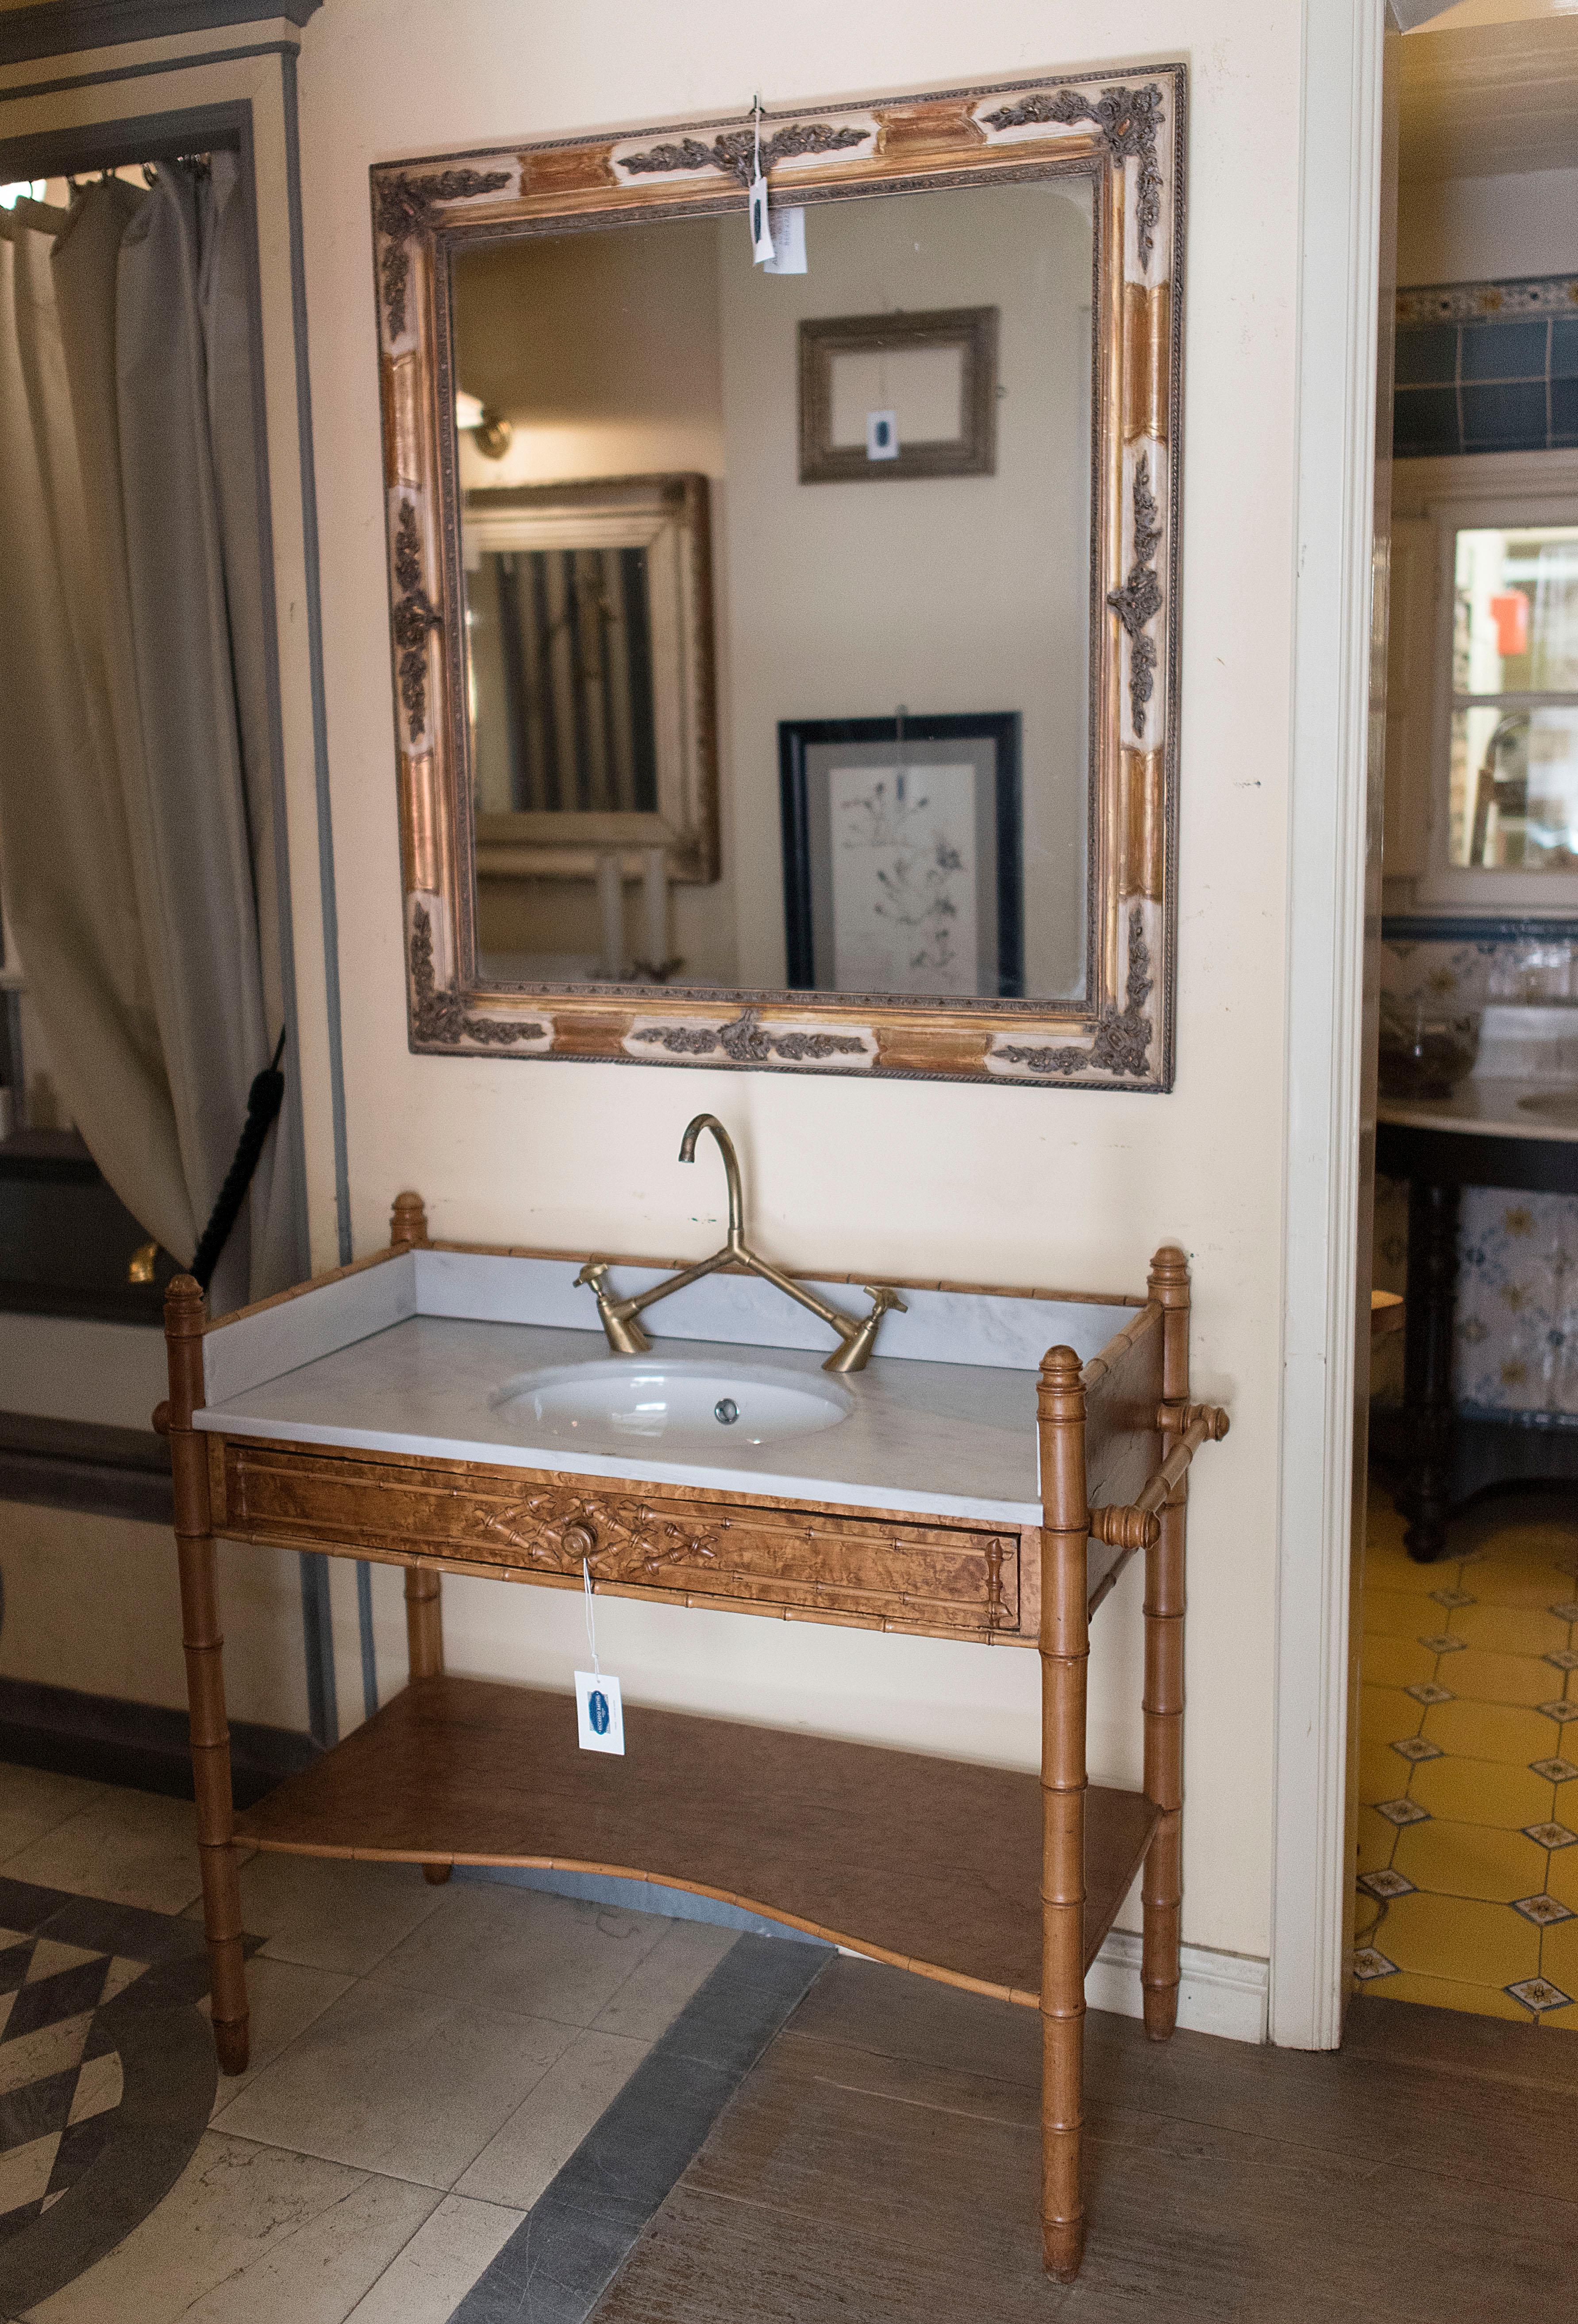 French Faux Bamboo with Marble Top Sink from 19th Century
This sink is provided with brass faucet and double drawers
